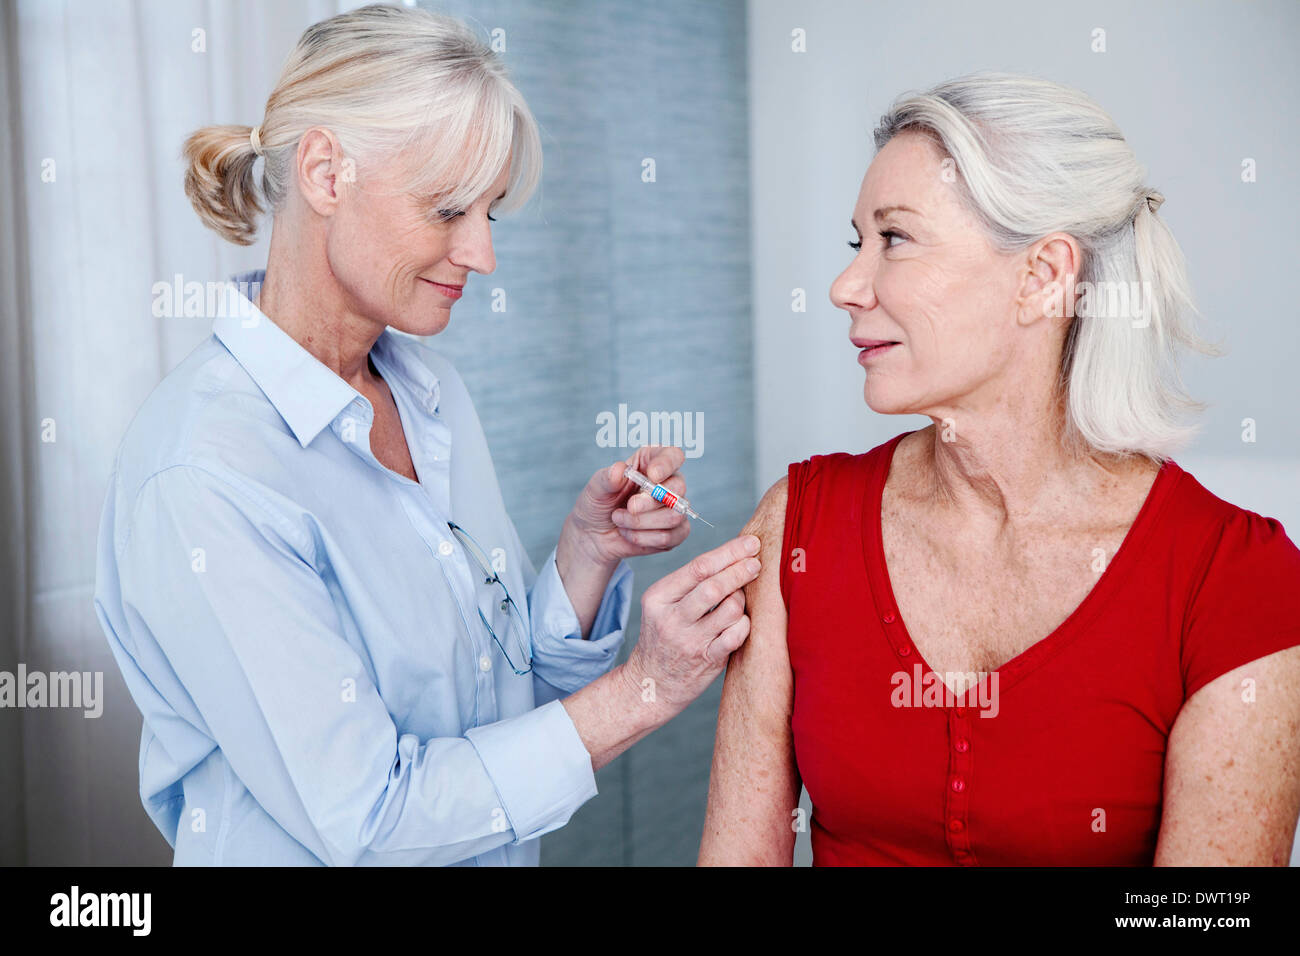 Vaccinating an elderly person Stock Photo